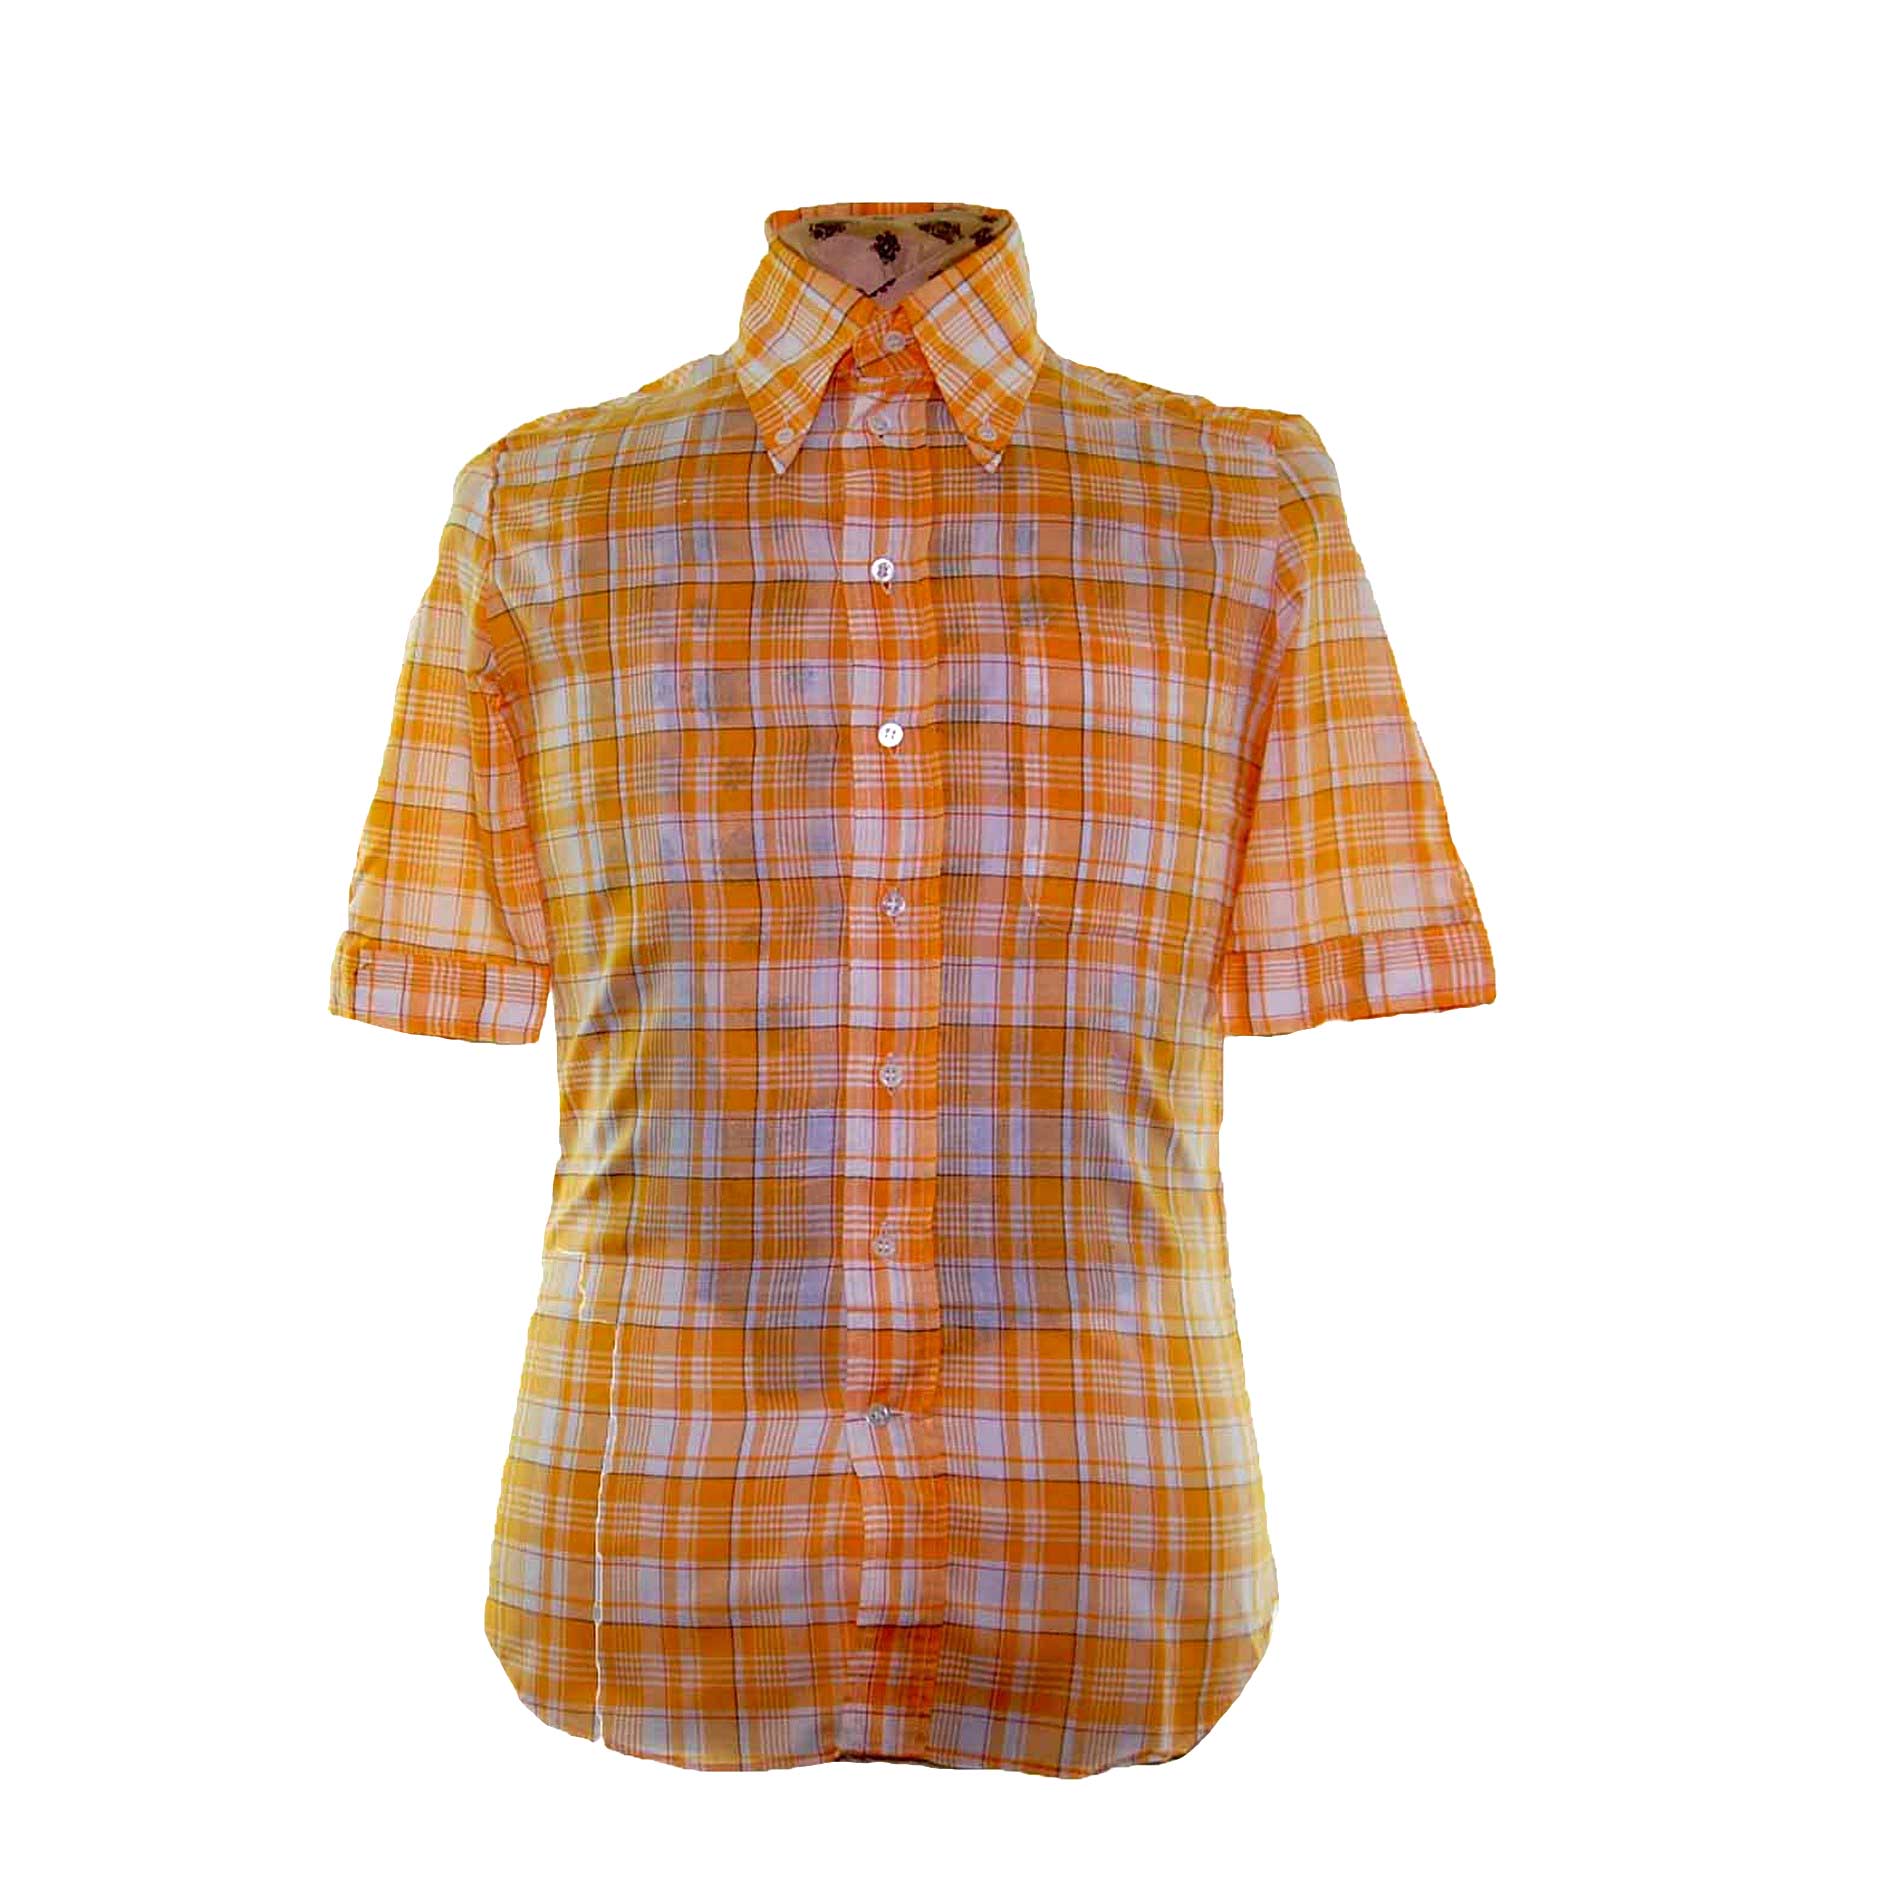 70s Yellow Checked Short Sleeve Shirt - Blue 17 Vintage Clothing